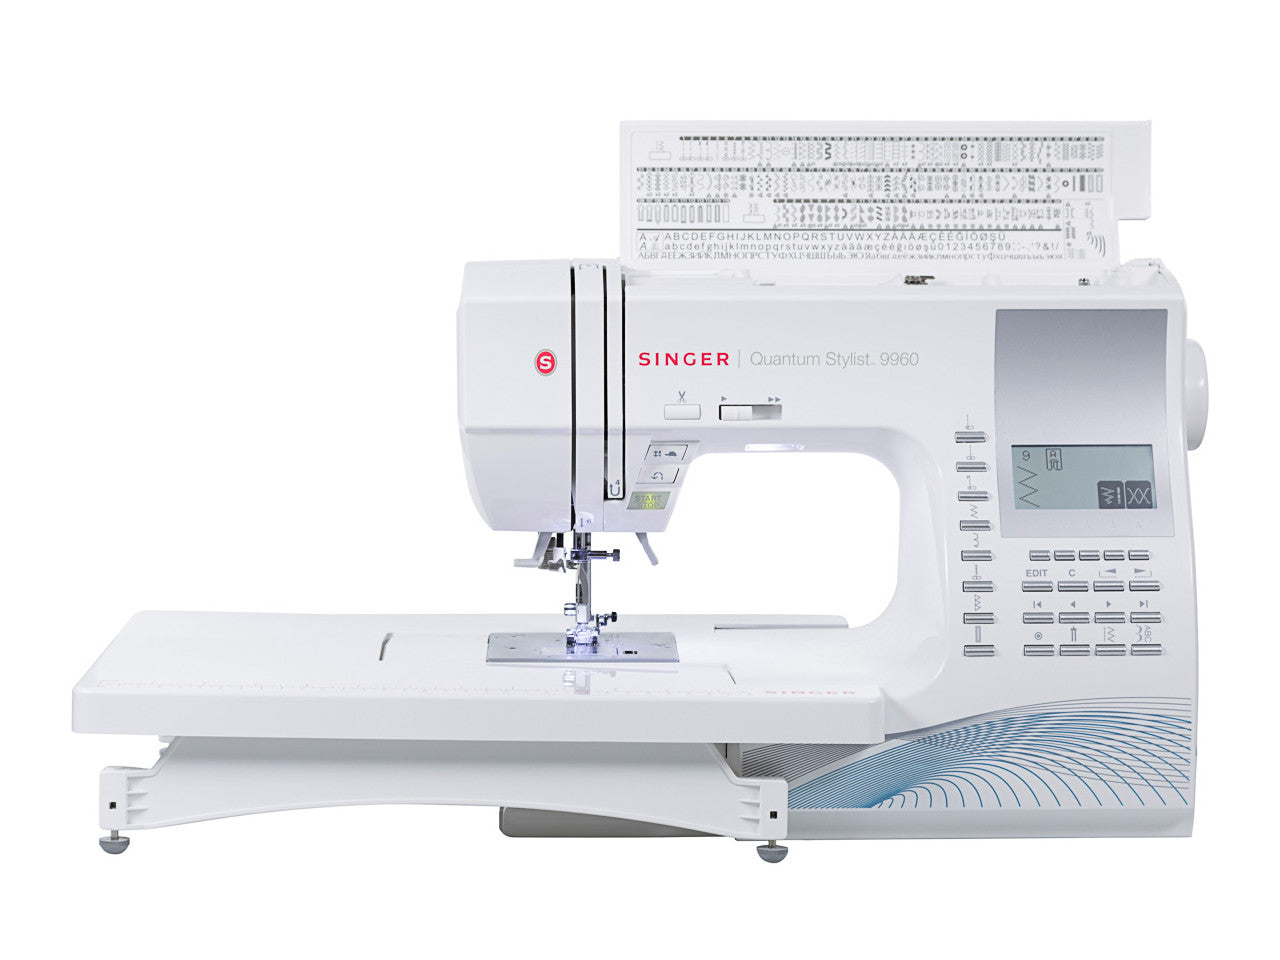 SINGER Quantum Stylist™ 9960 Sewing Machine – Singer South Africa